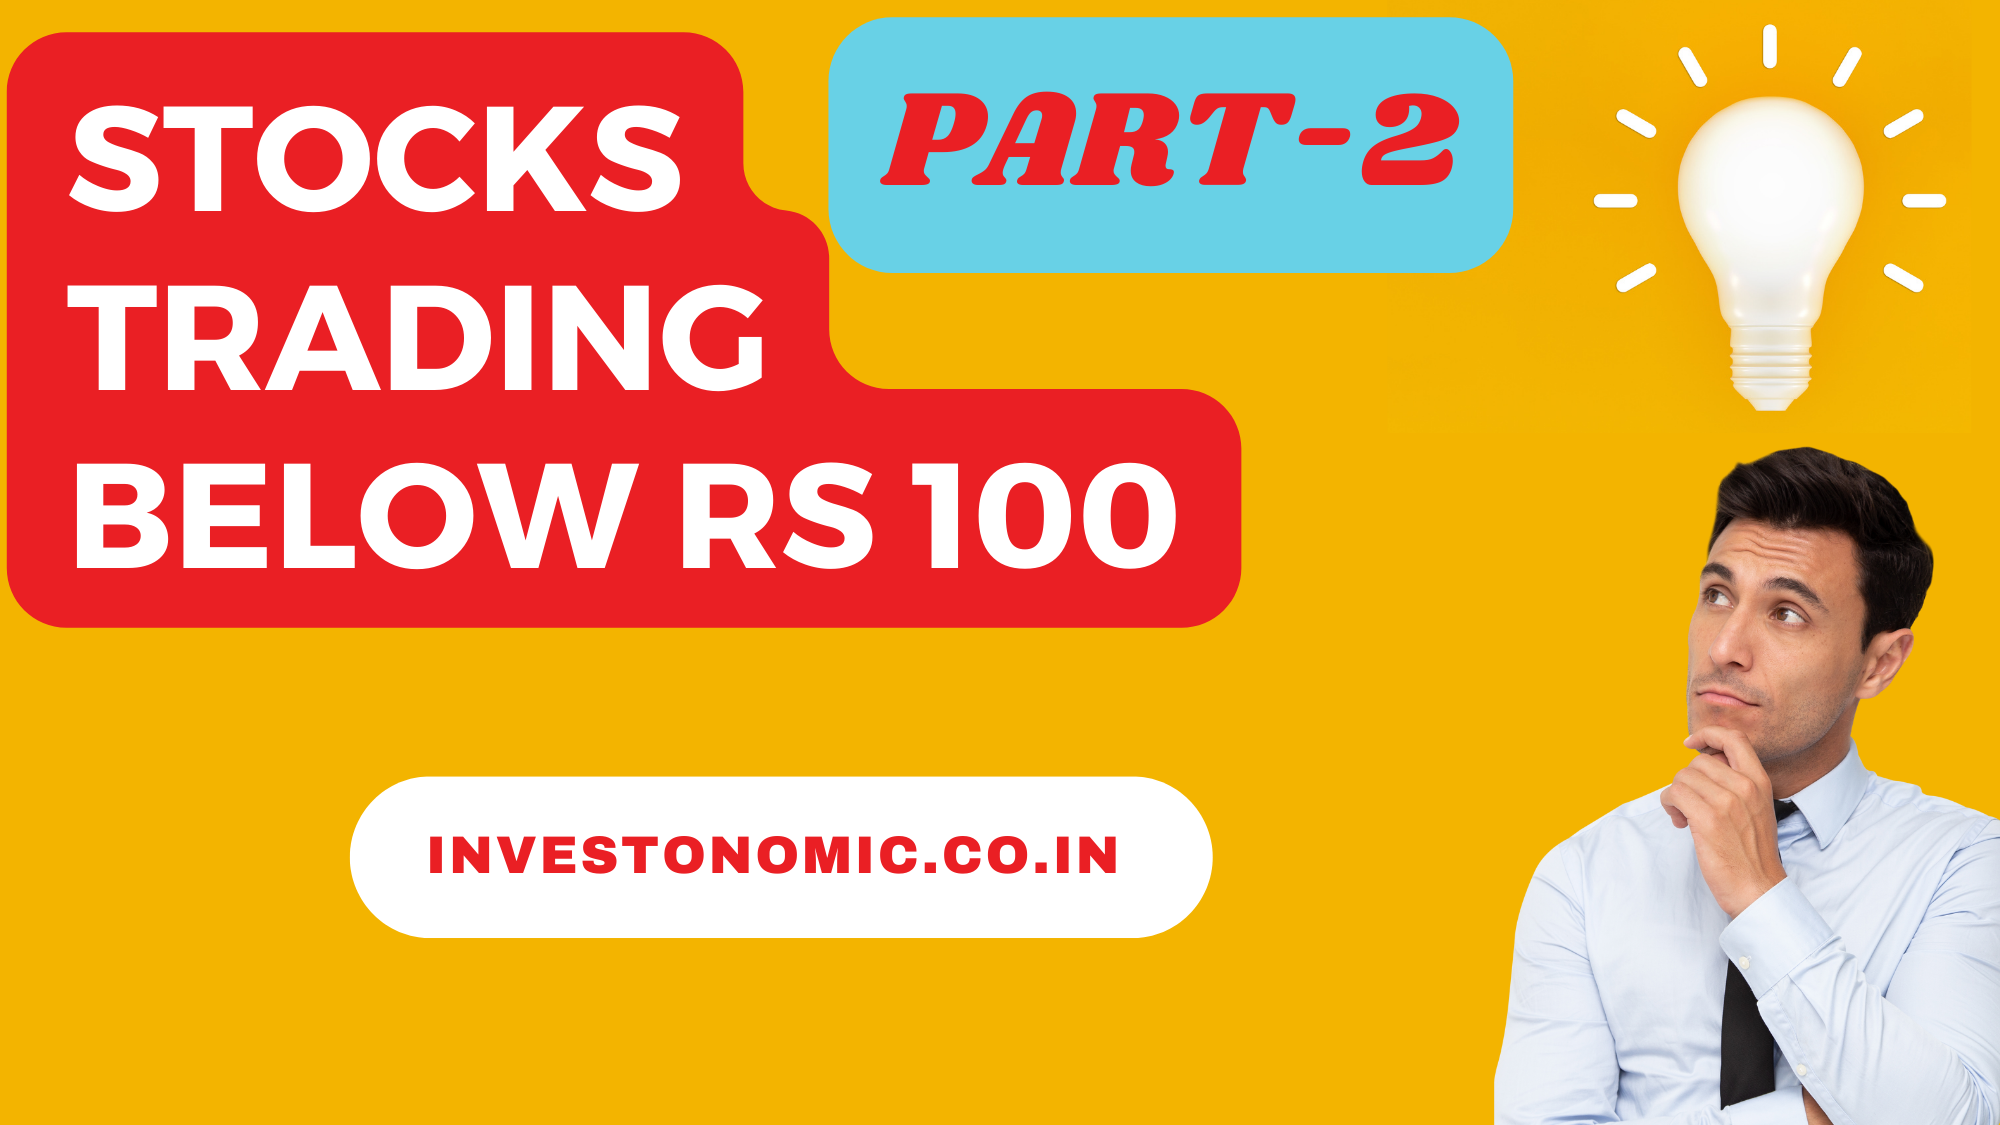 Stocks Trading below Rs 100 - Part 2